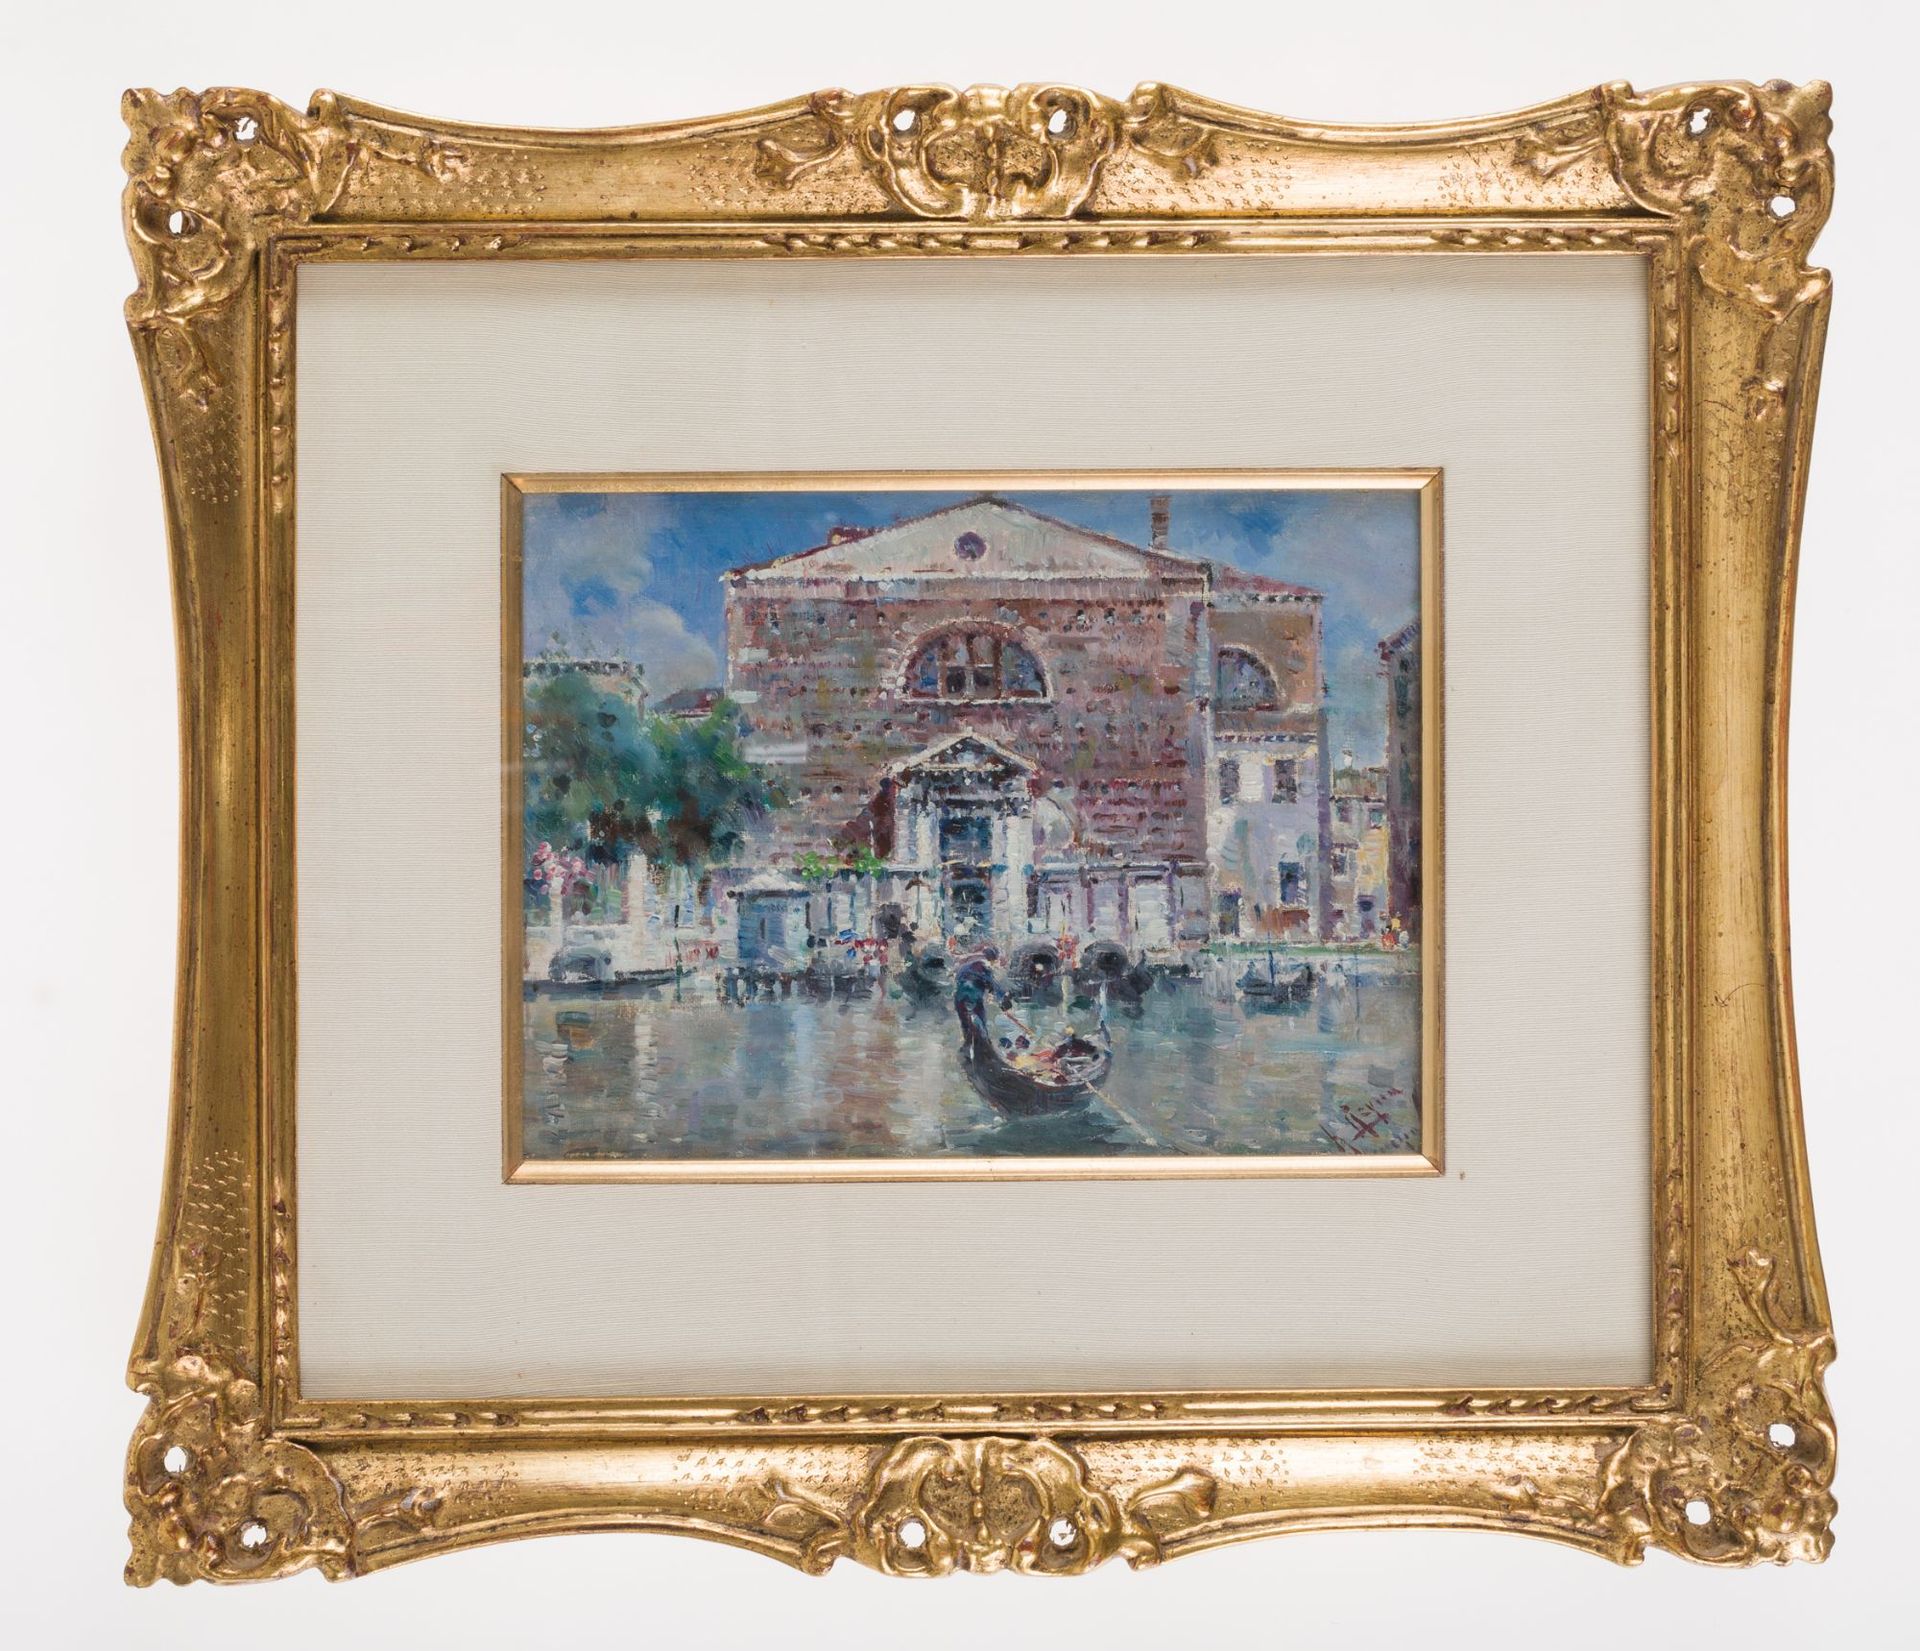 ANTONIO REYNA MAlaga (1862) / Rome (1937) "The Grand Canal of Venice with the ch&hellip;